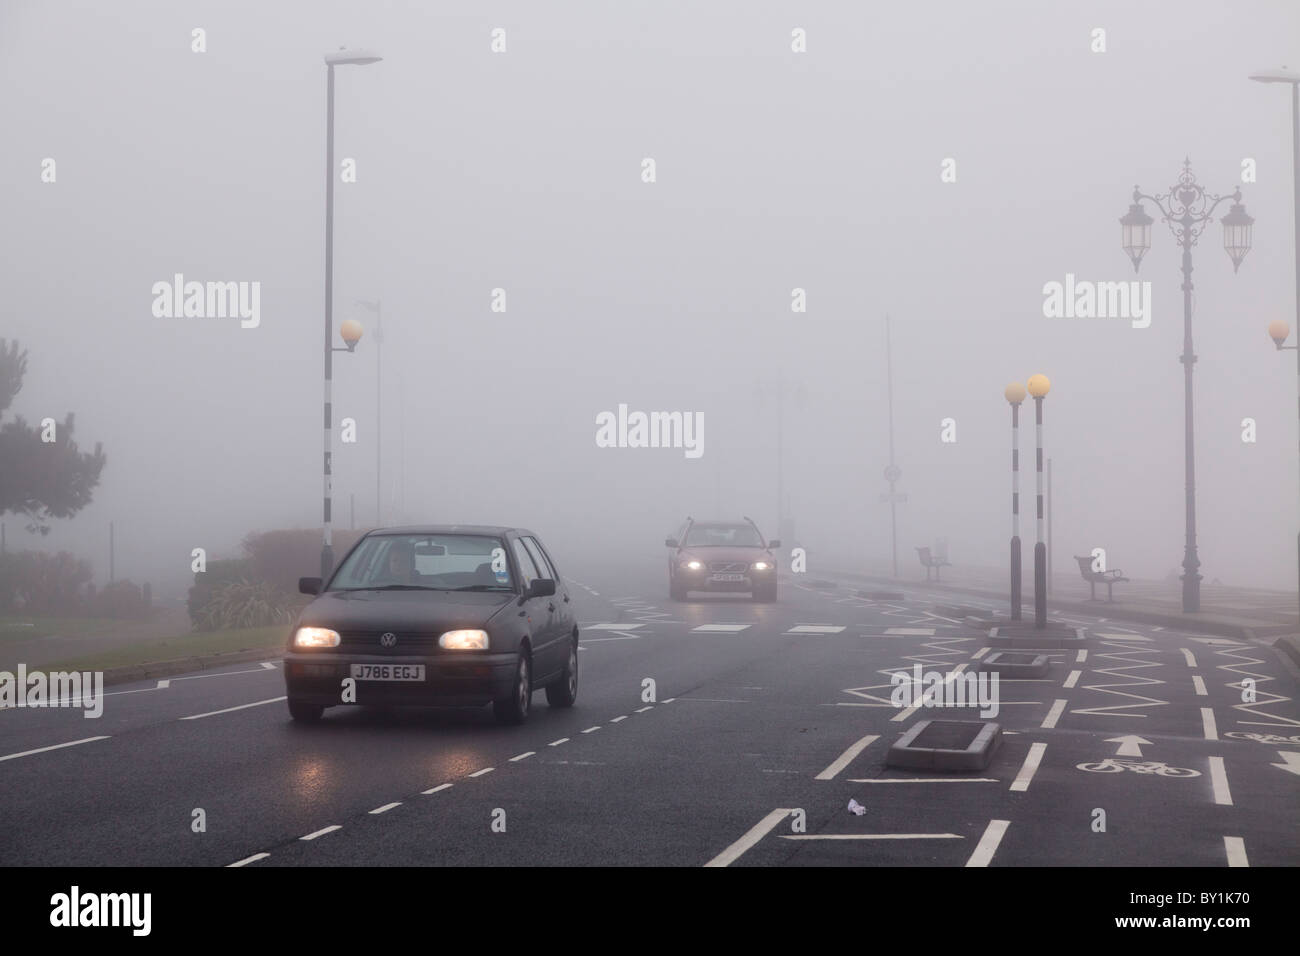 Cars travelling in urban environment with road markings on a foggy day with lights on Stock Photo